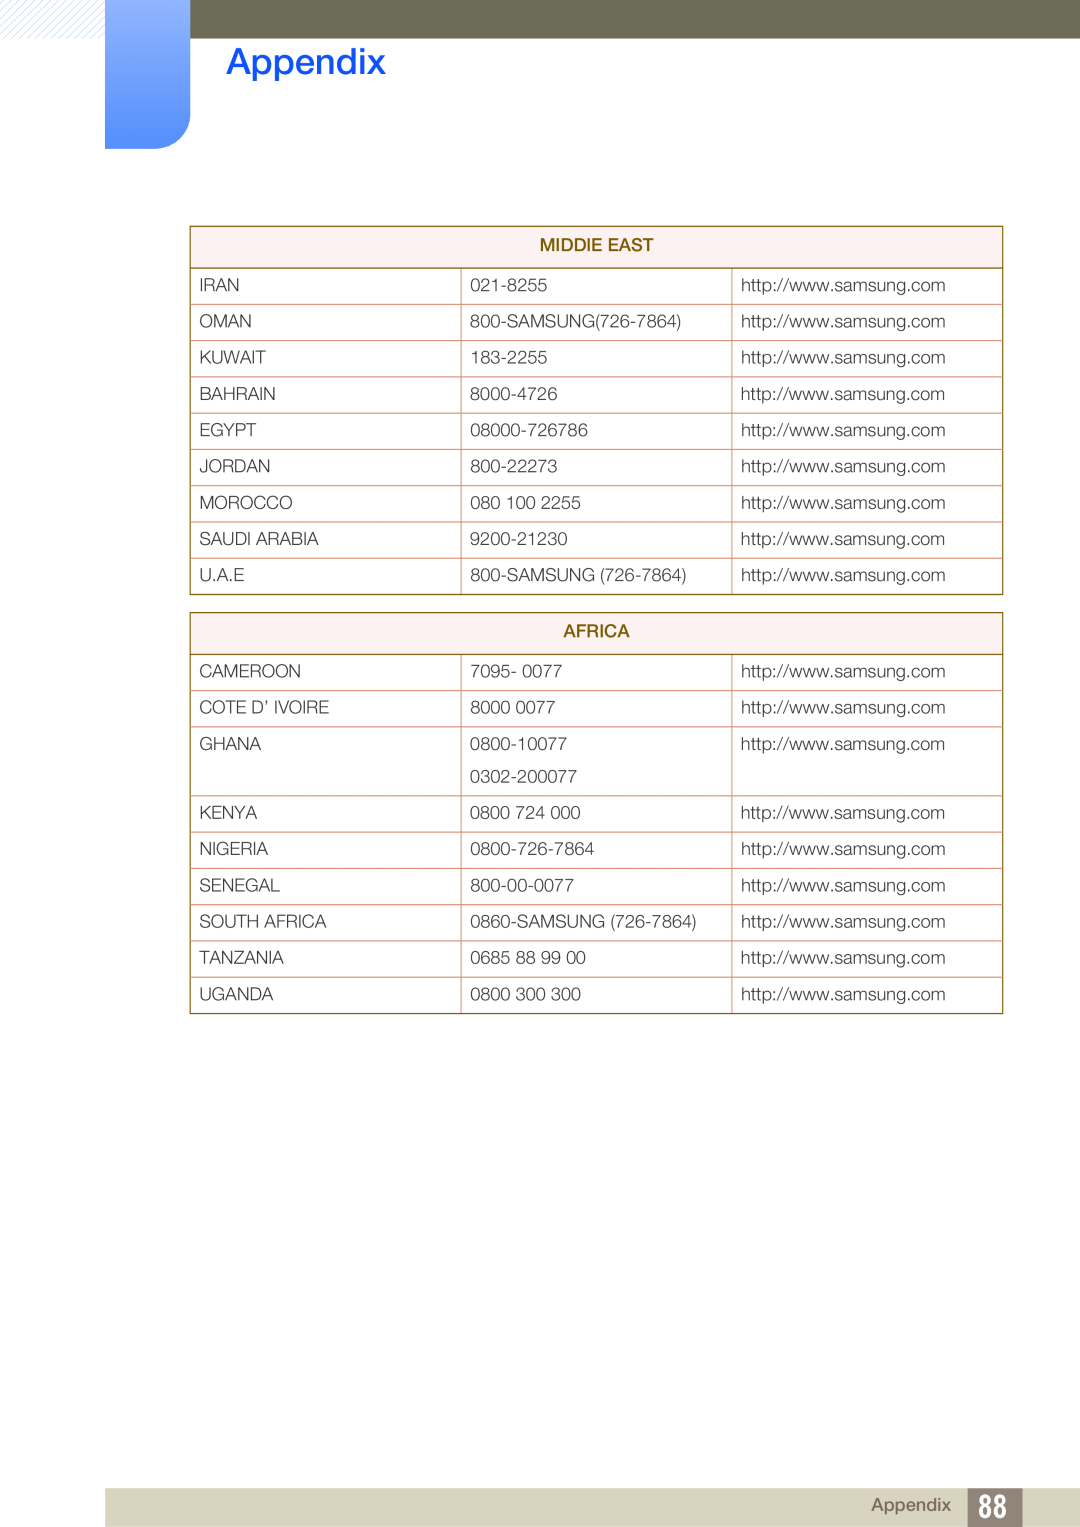 Samsung S24B420BW, S19B420M, S19B420BW, S22B420BW user manual Appendix, MIDDlE EAST, Africa 